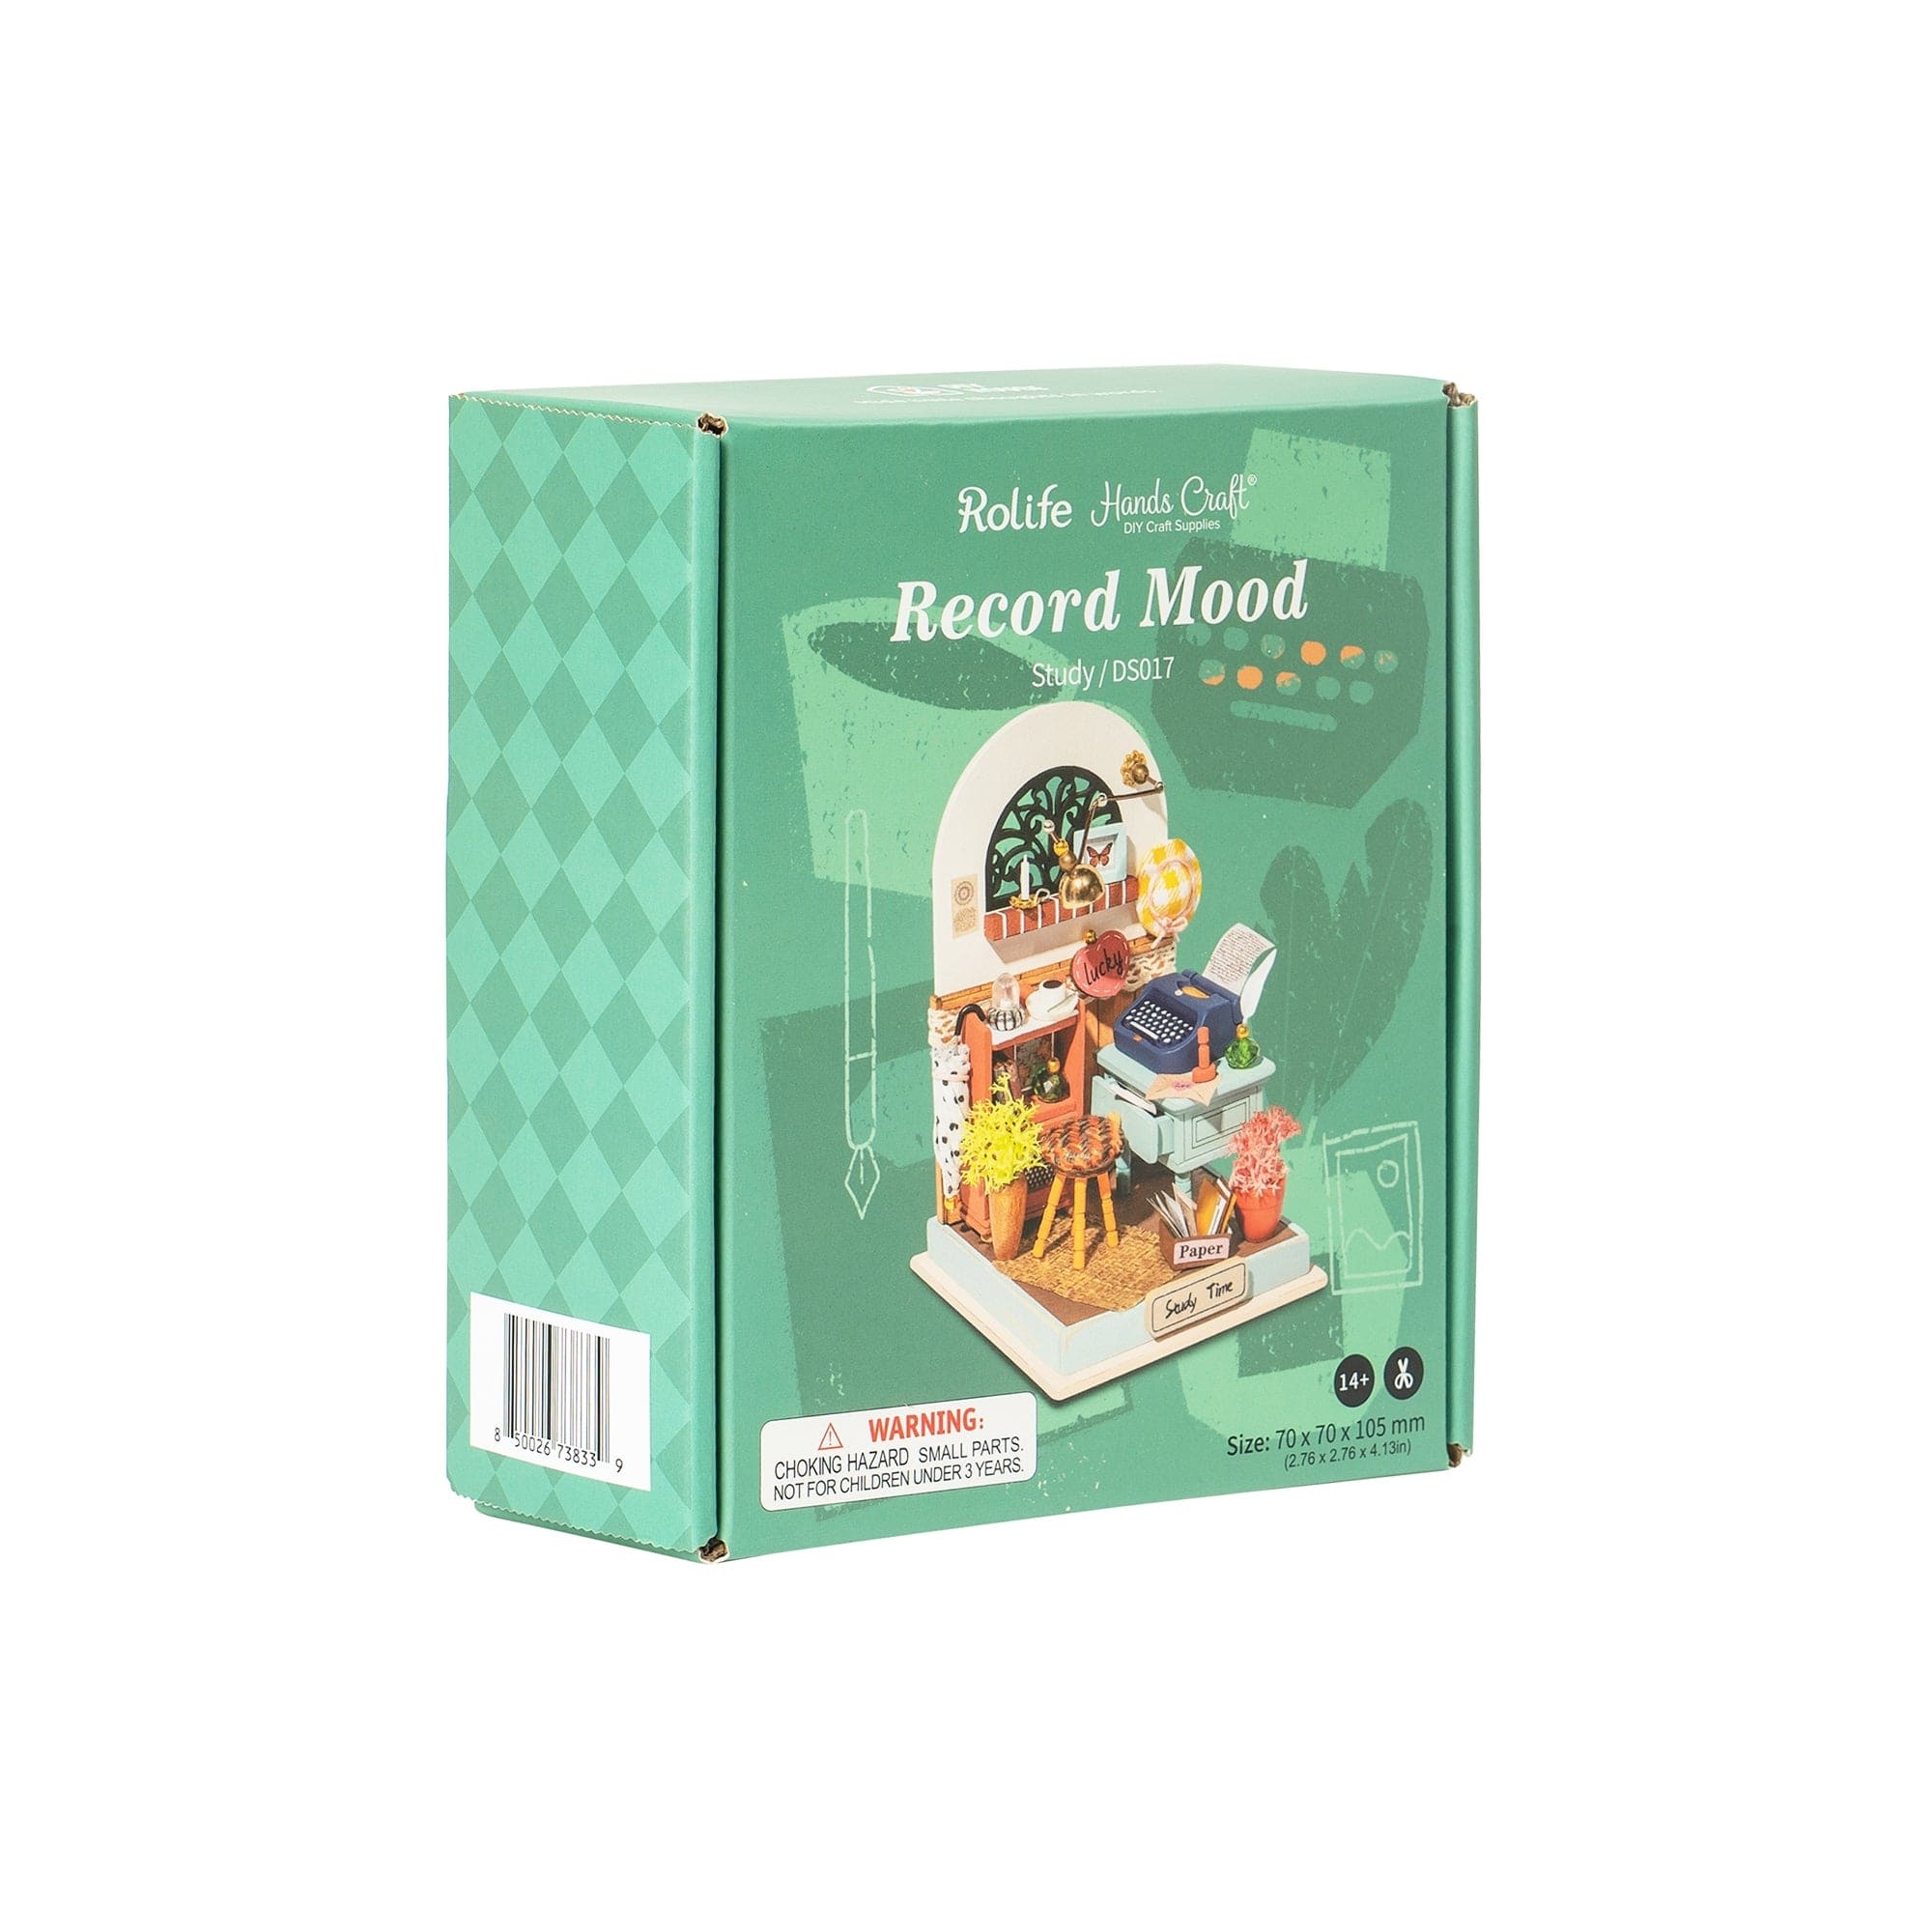 Hands Craft DS017, DIY Palm-Sized Miniature Dollhouse Kit: Record Mood (Study) Kawaii Gifts 850026738339